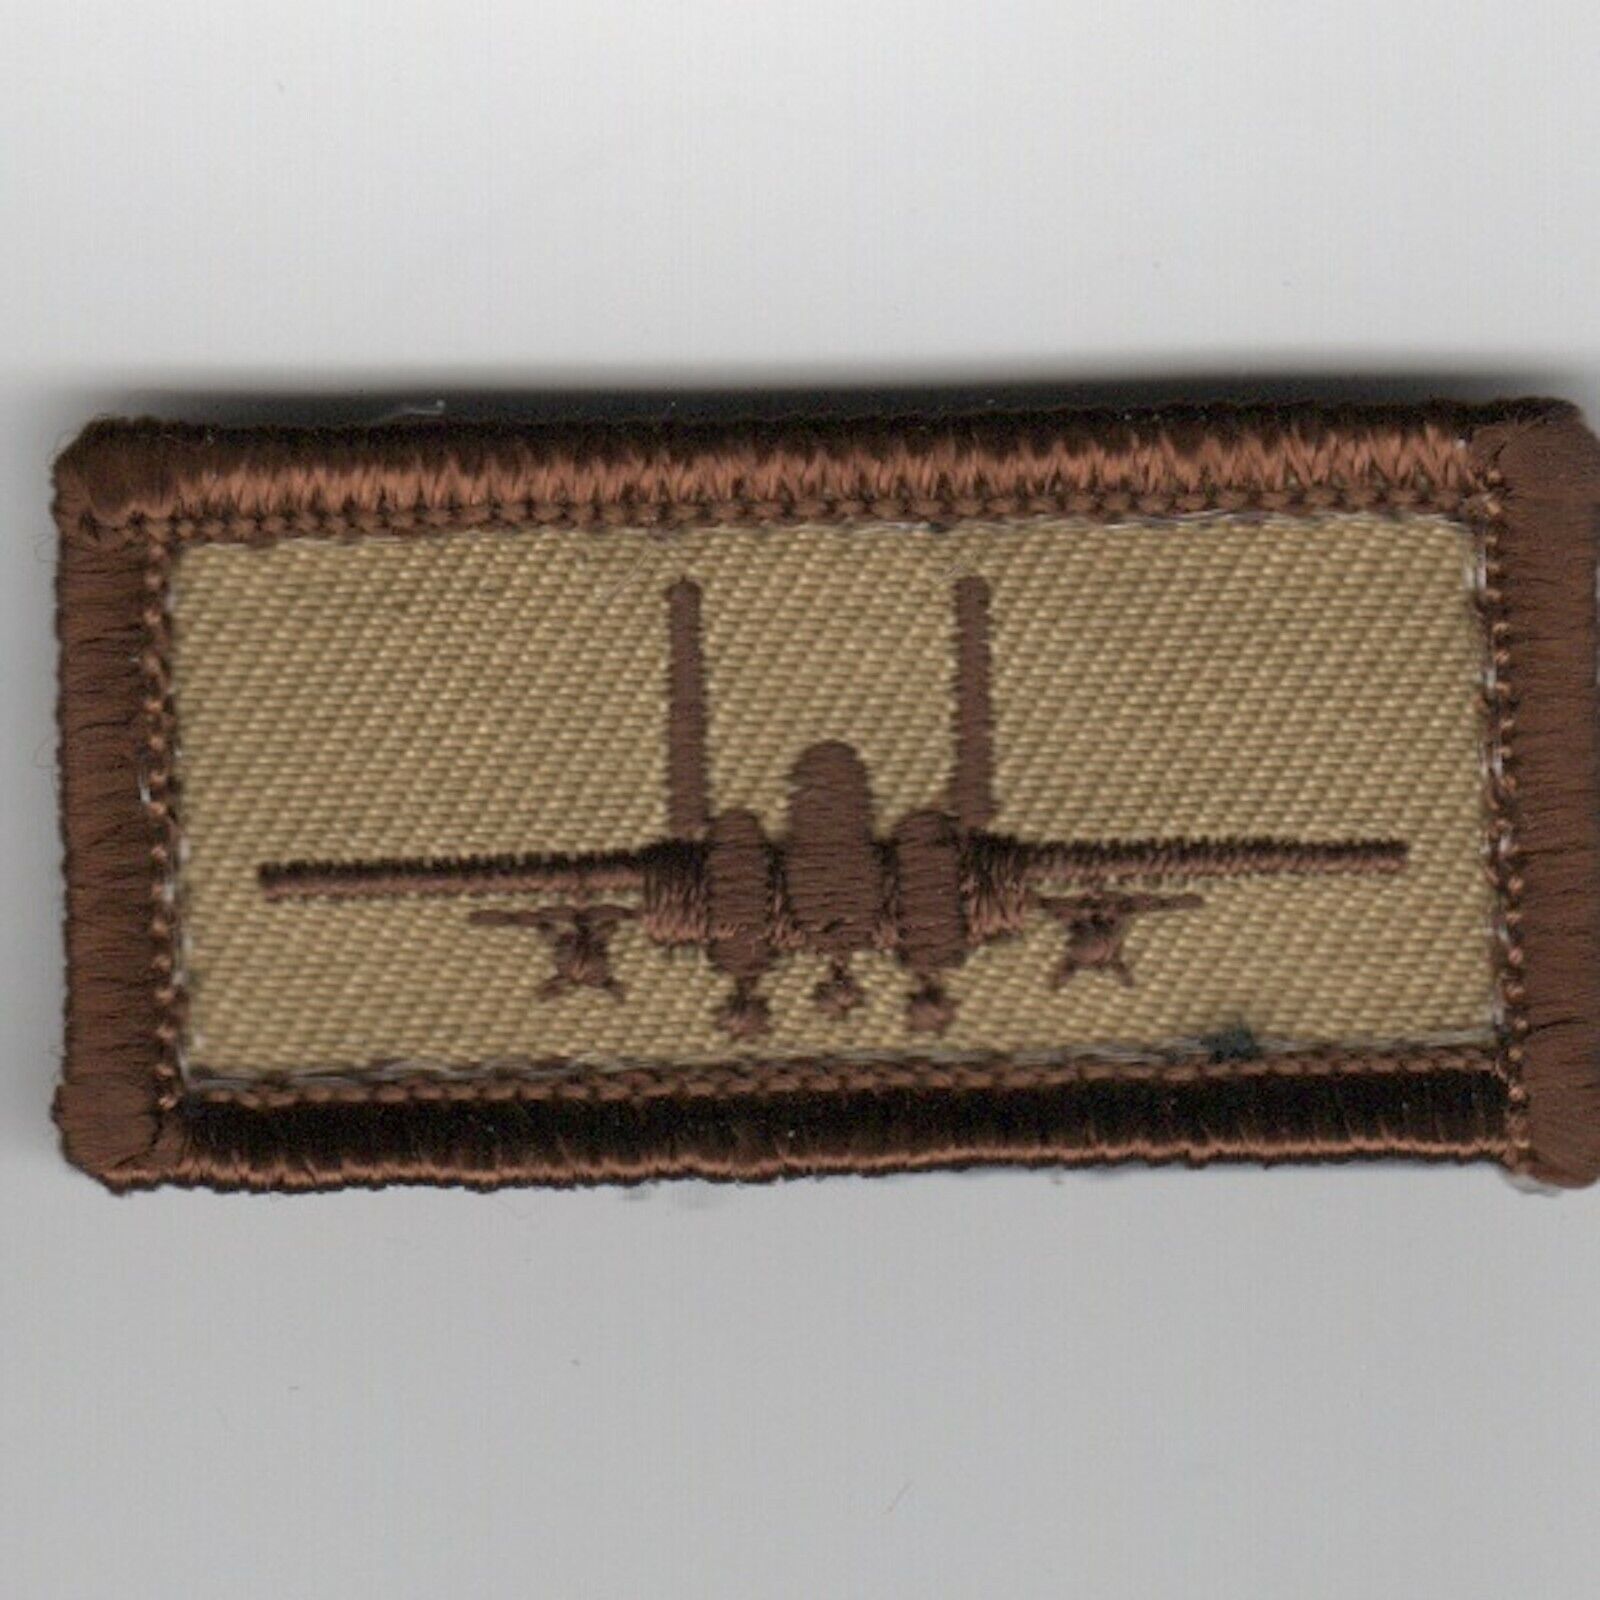 AIR FORCE FLIGHT SUIT SLEEVE F-15E DESERT HOOK LOOP EMBROIDERED JACKET PATCH - $39.99